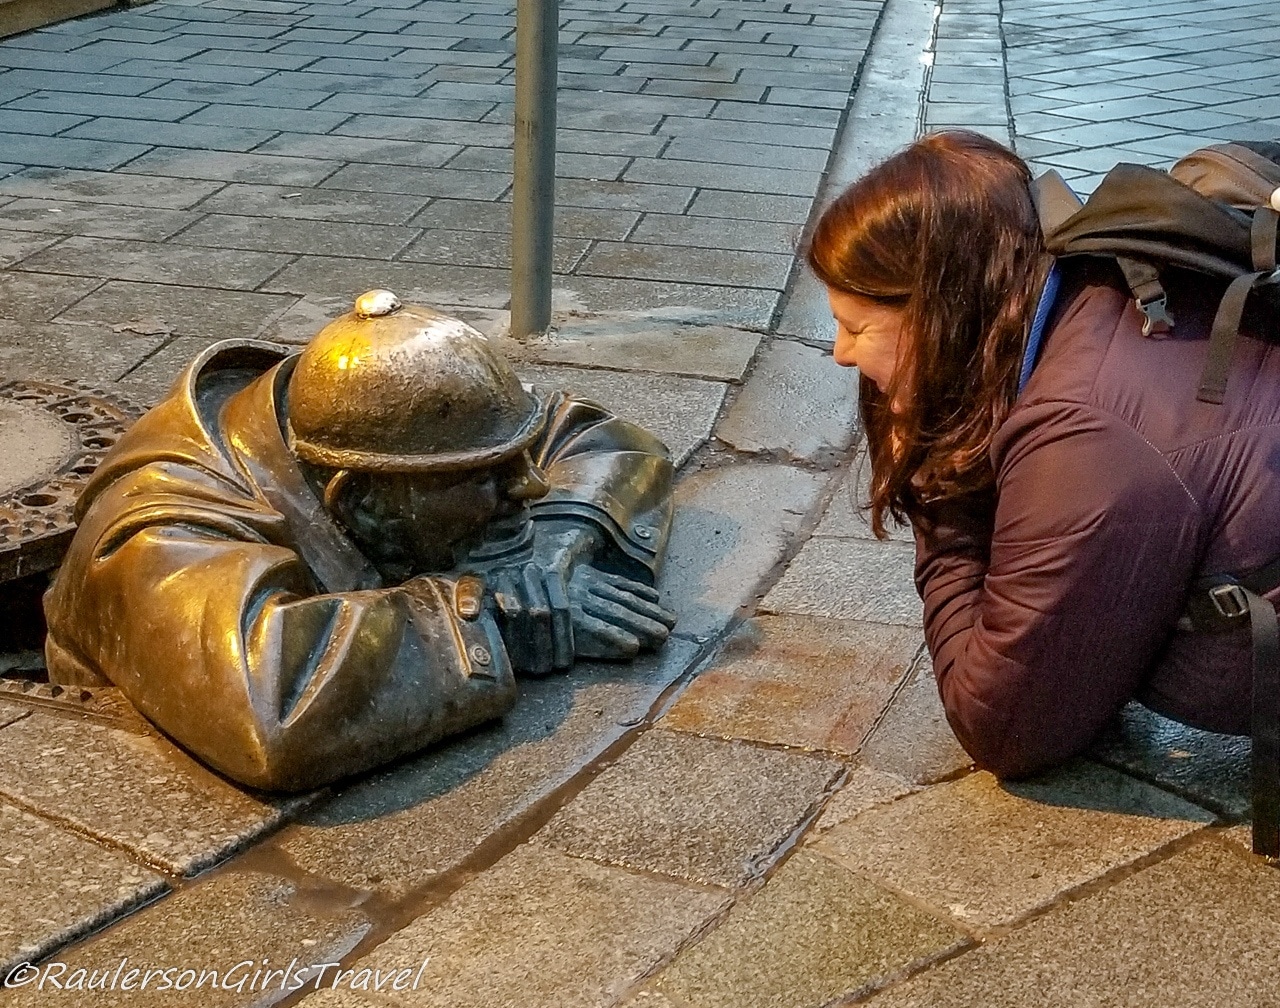 Heather with Man in Sewer - Bratislava Statue